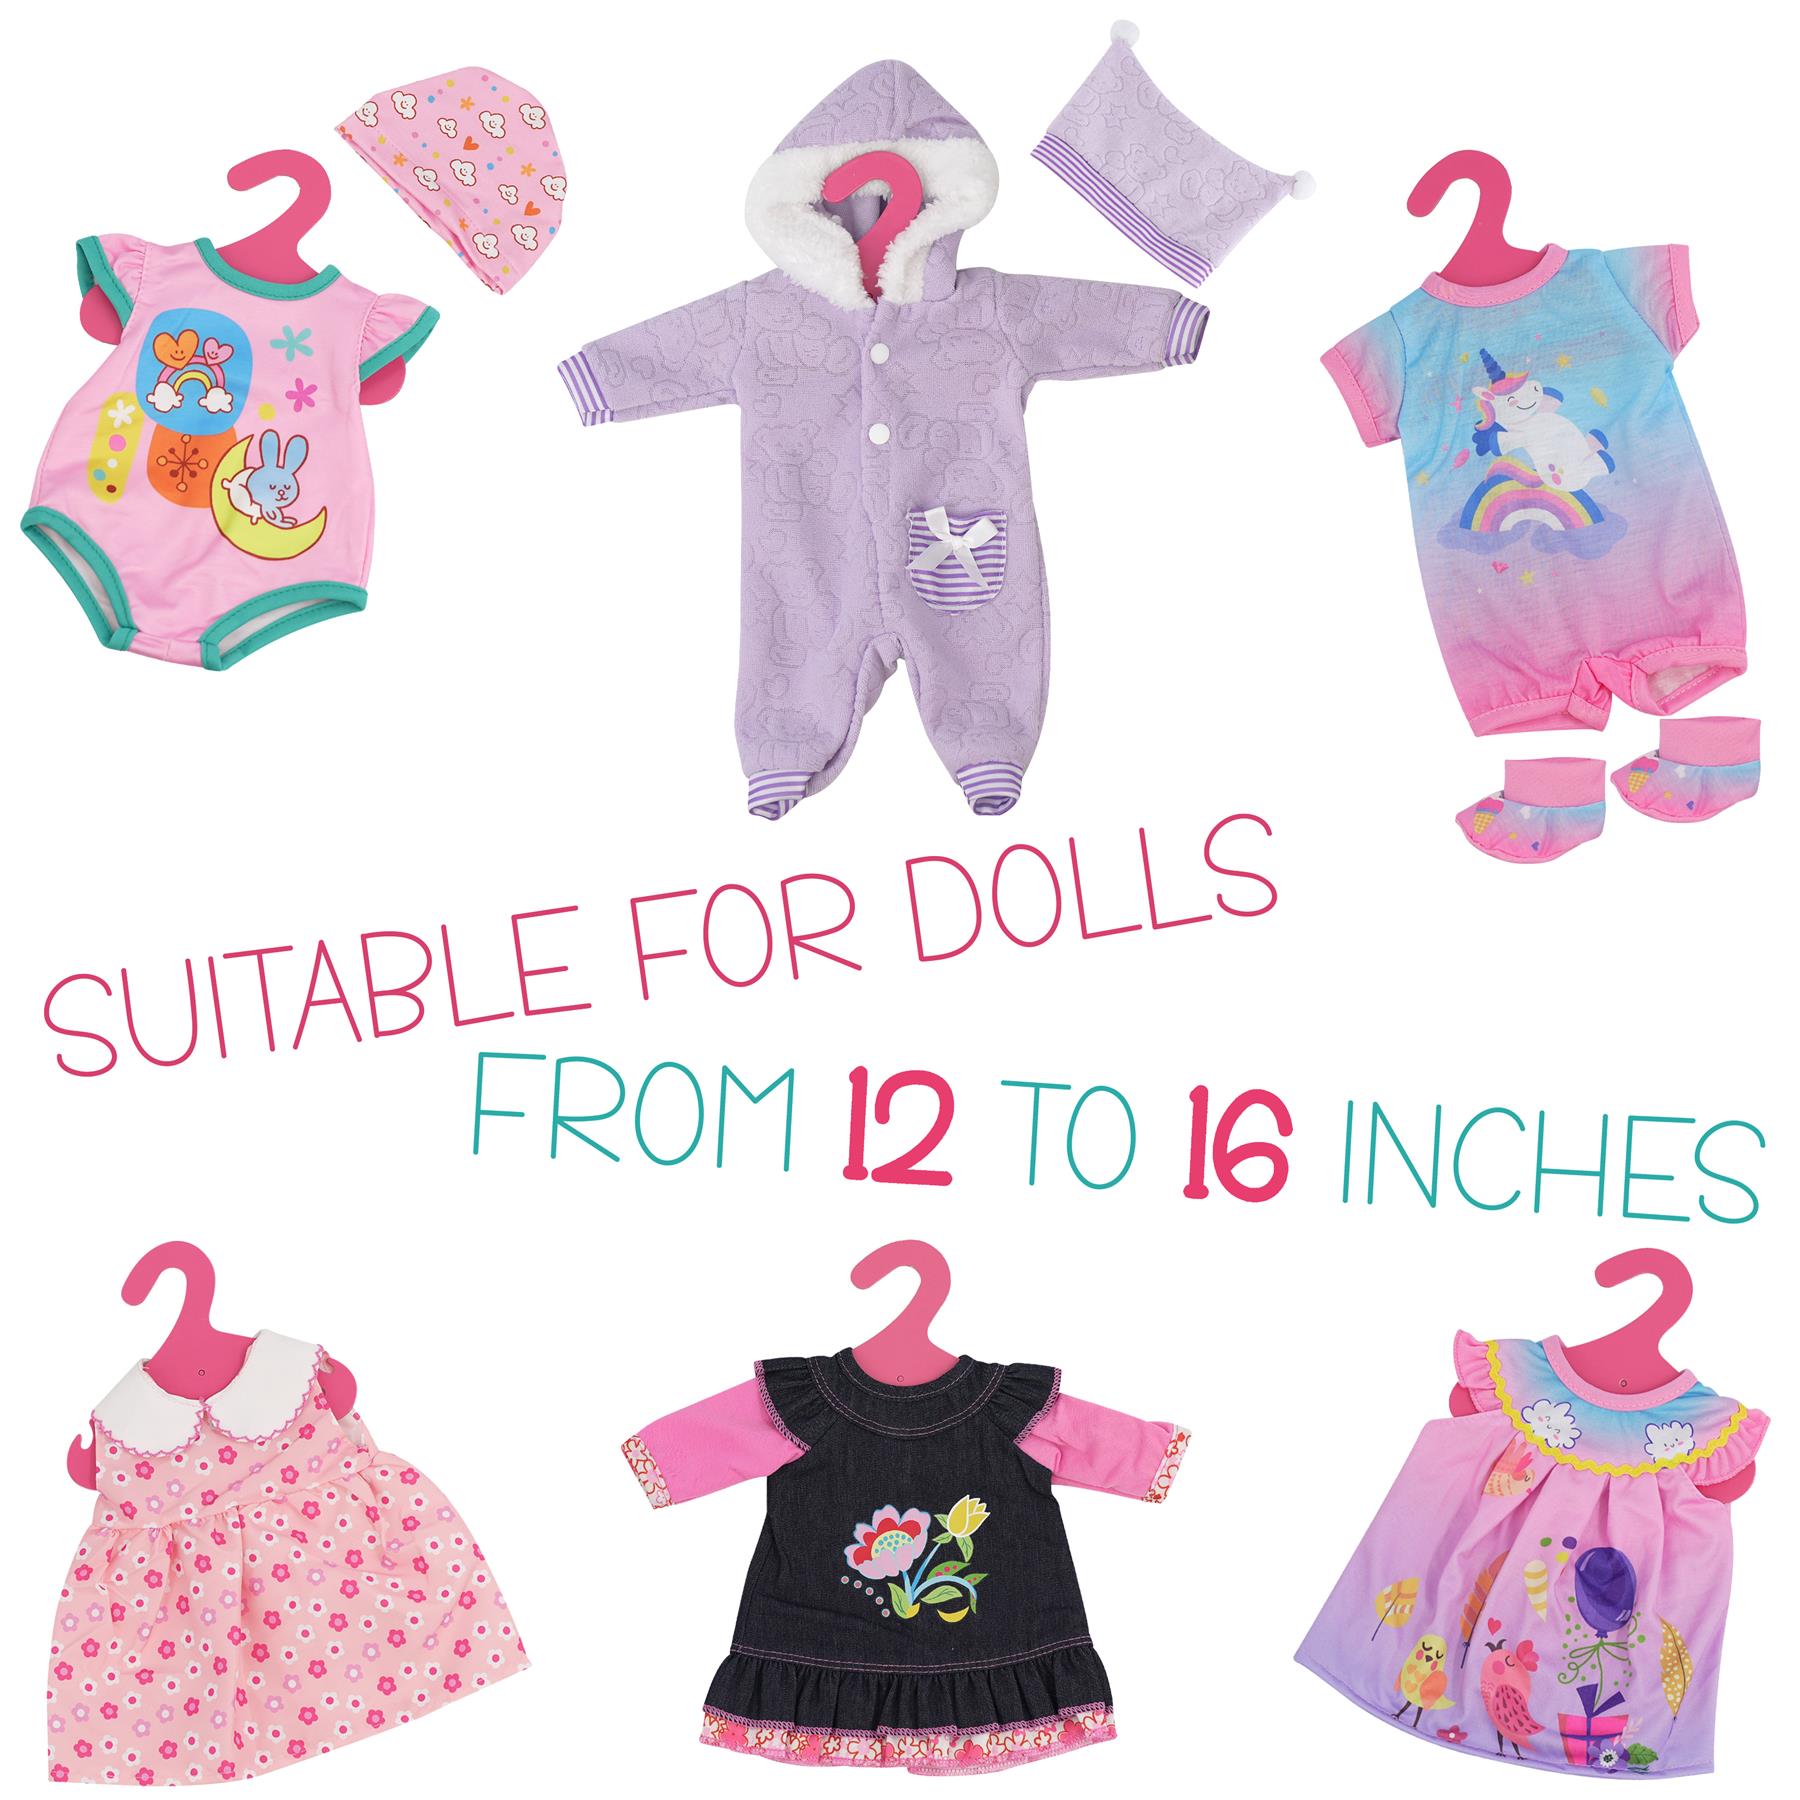 Baby Doll Set of 6 Outfits 12-16" by BiBi Doll - The Magic Toy Shop